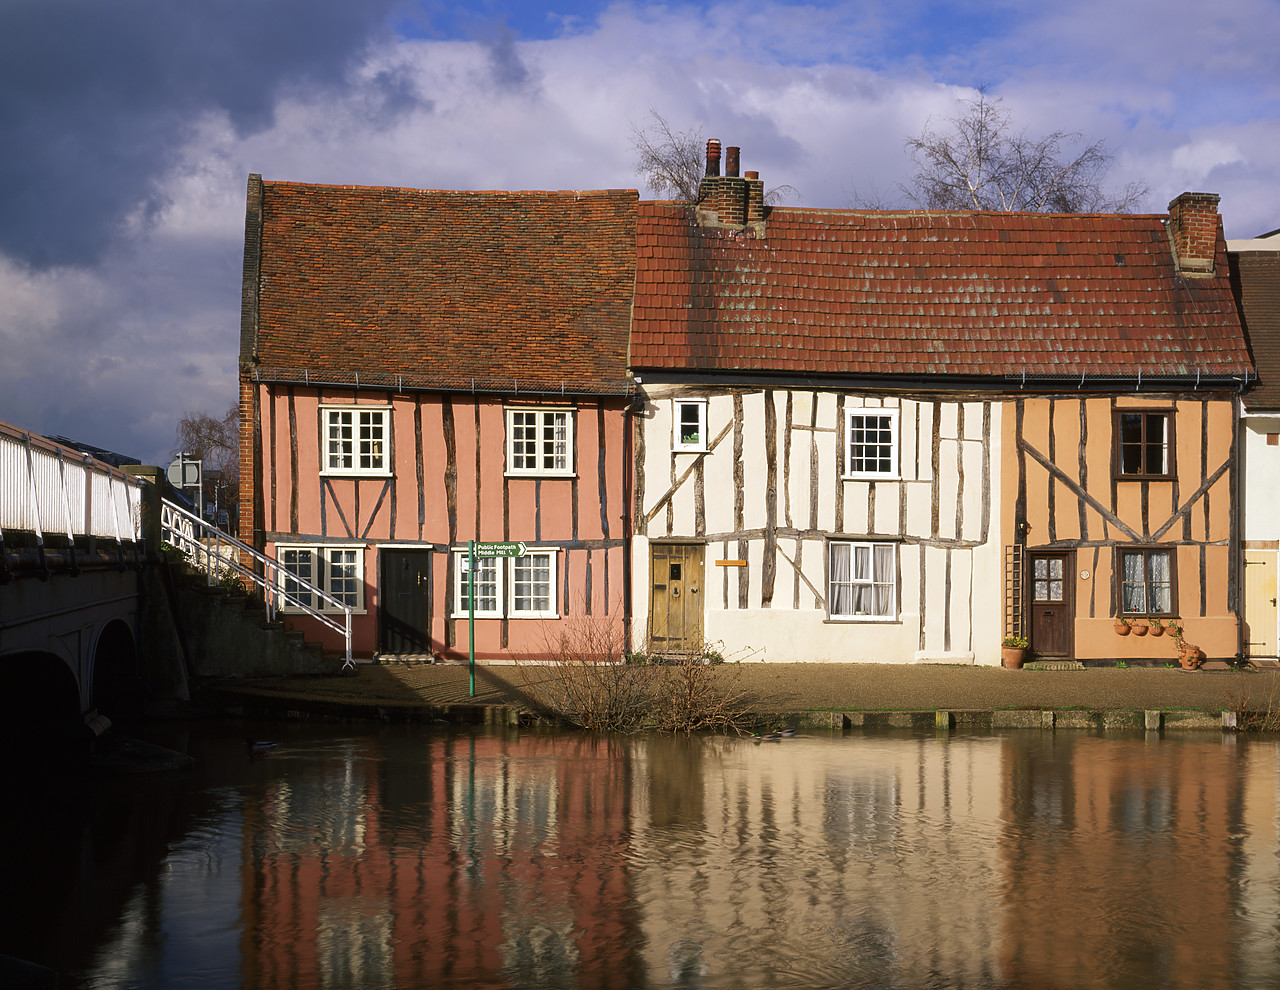 #200031-4 - Timbered Cottages, Colchester, Essex, England